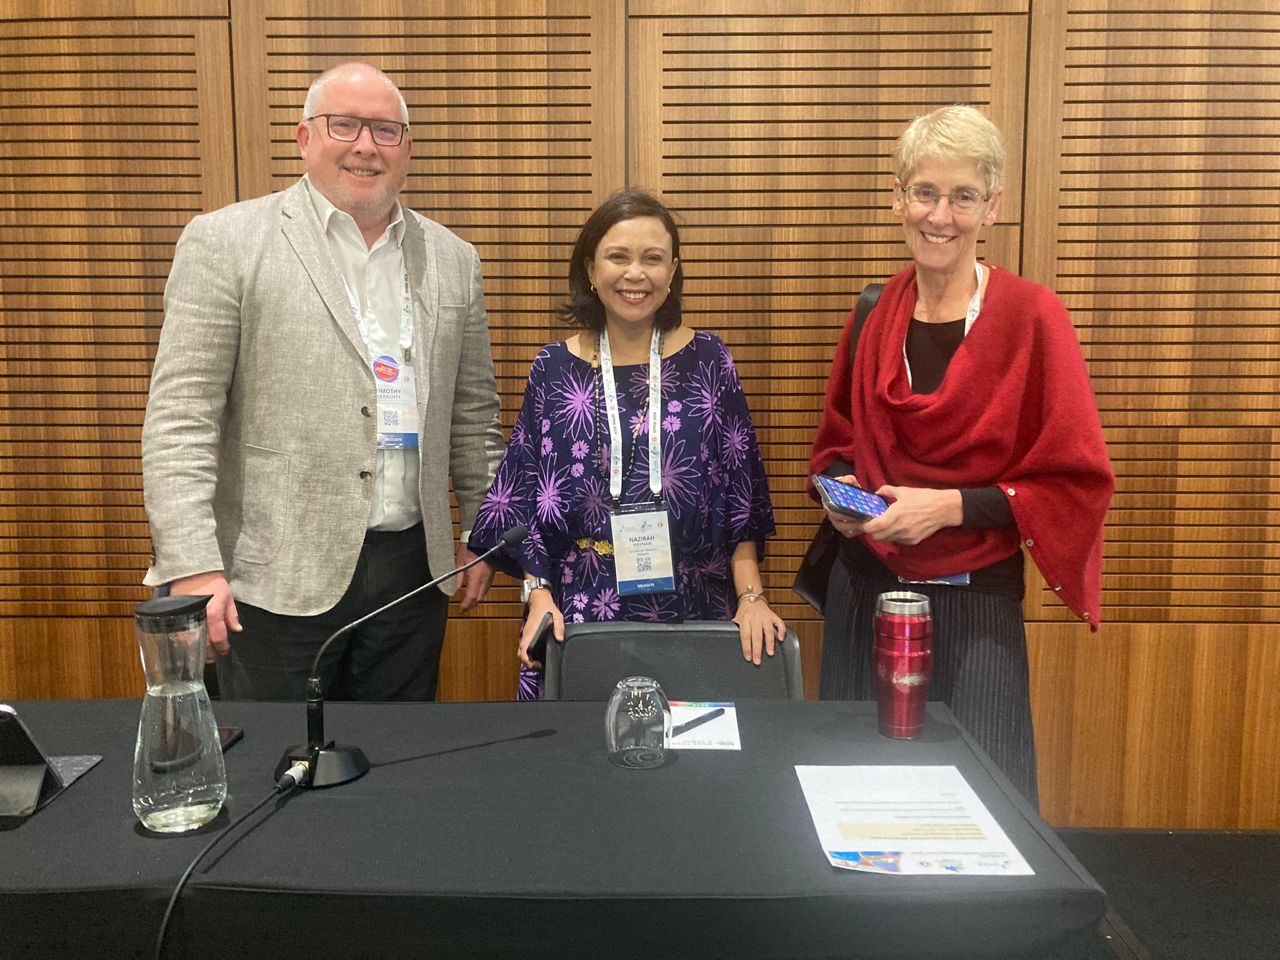 Prof Tim Geraghty standing with Prof Nasirah Hasnan from Malaysia and Prof Lisa Harvey from Sydney who were two other speakers in the session